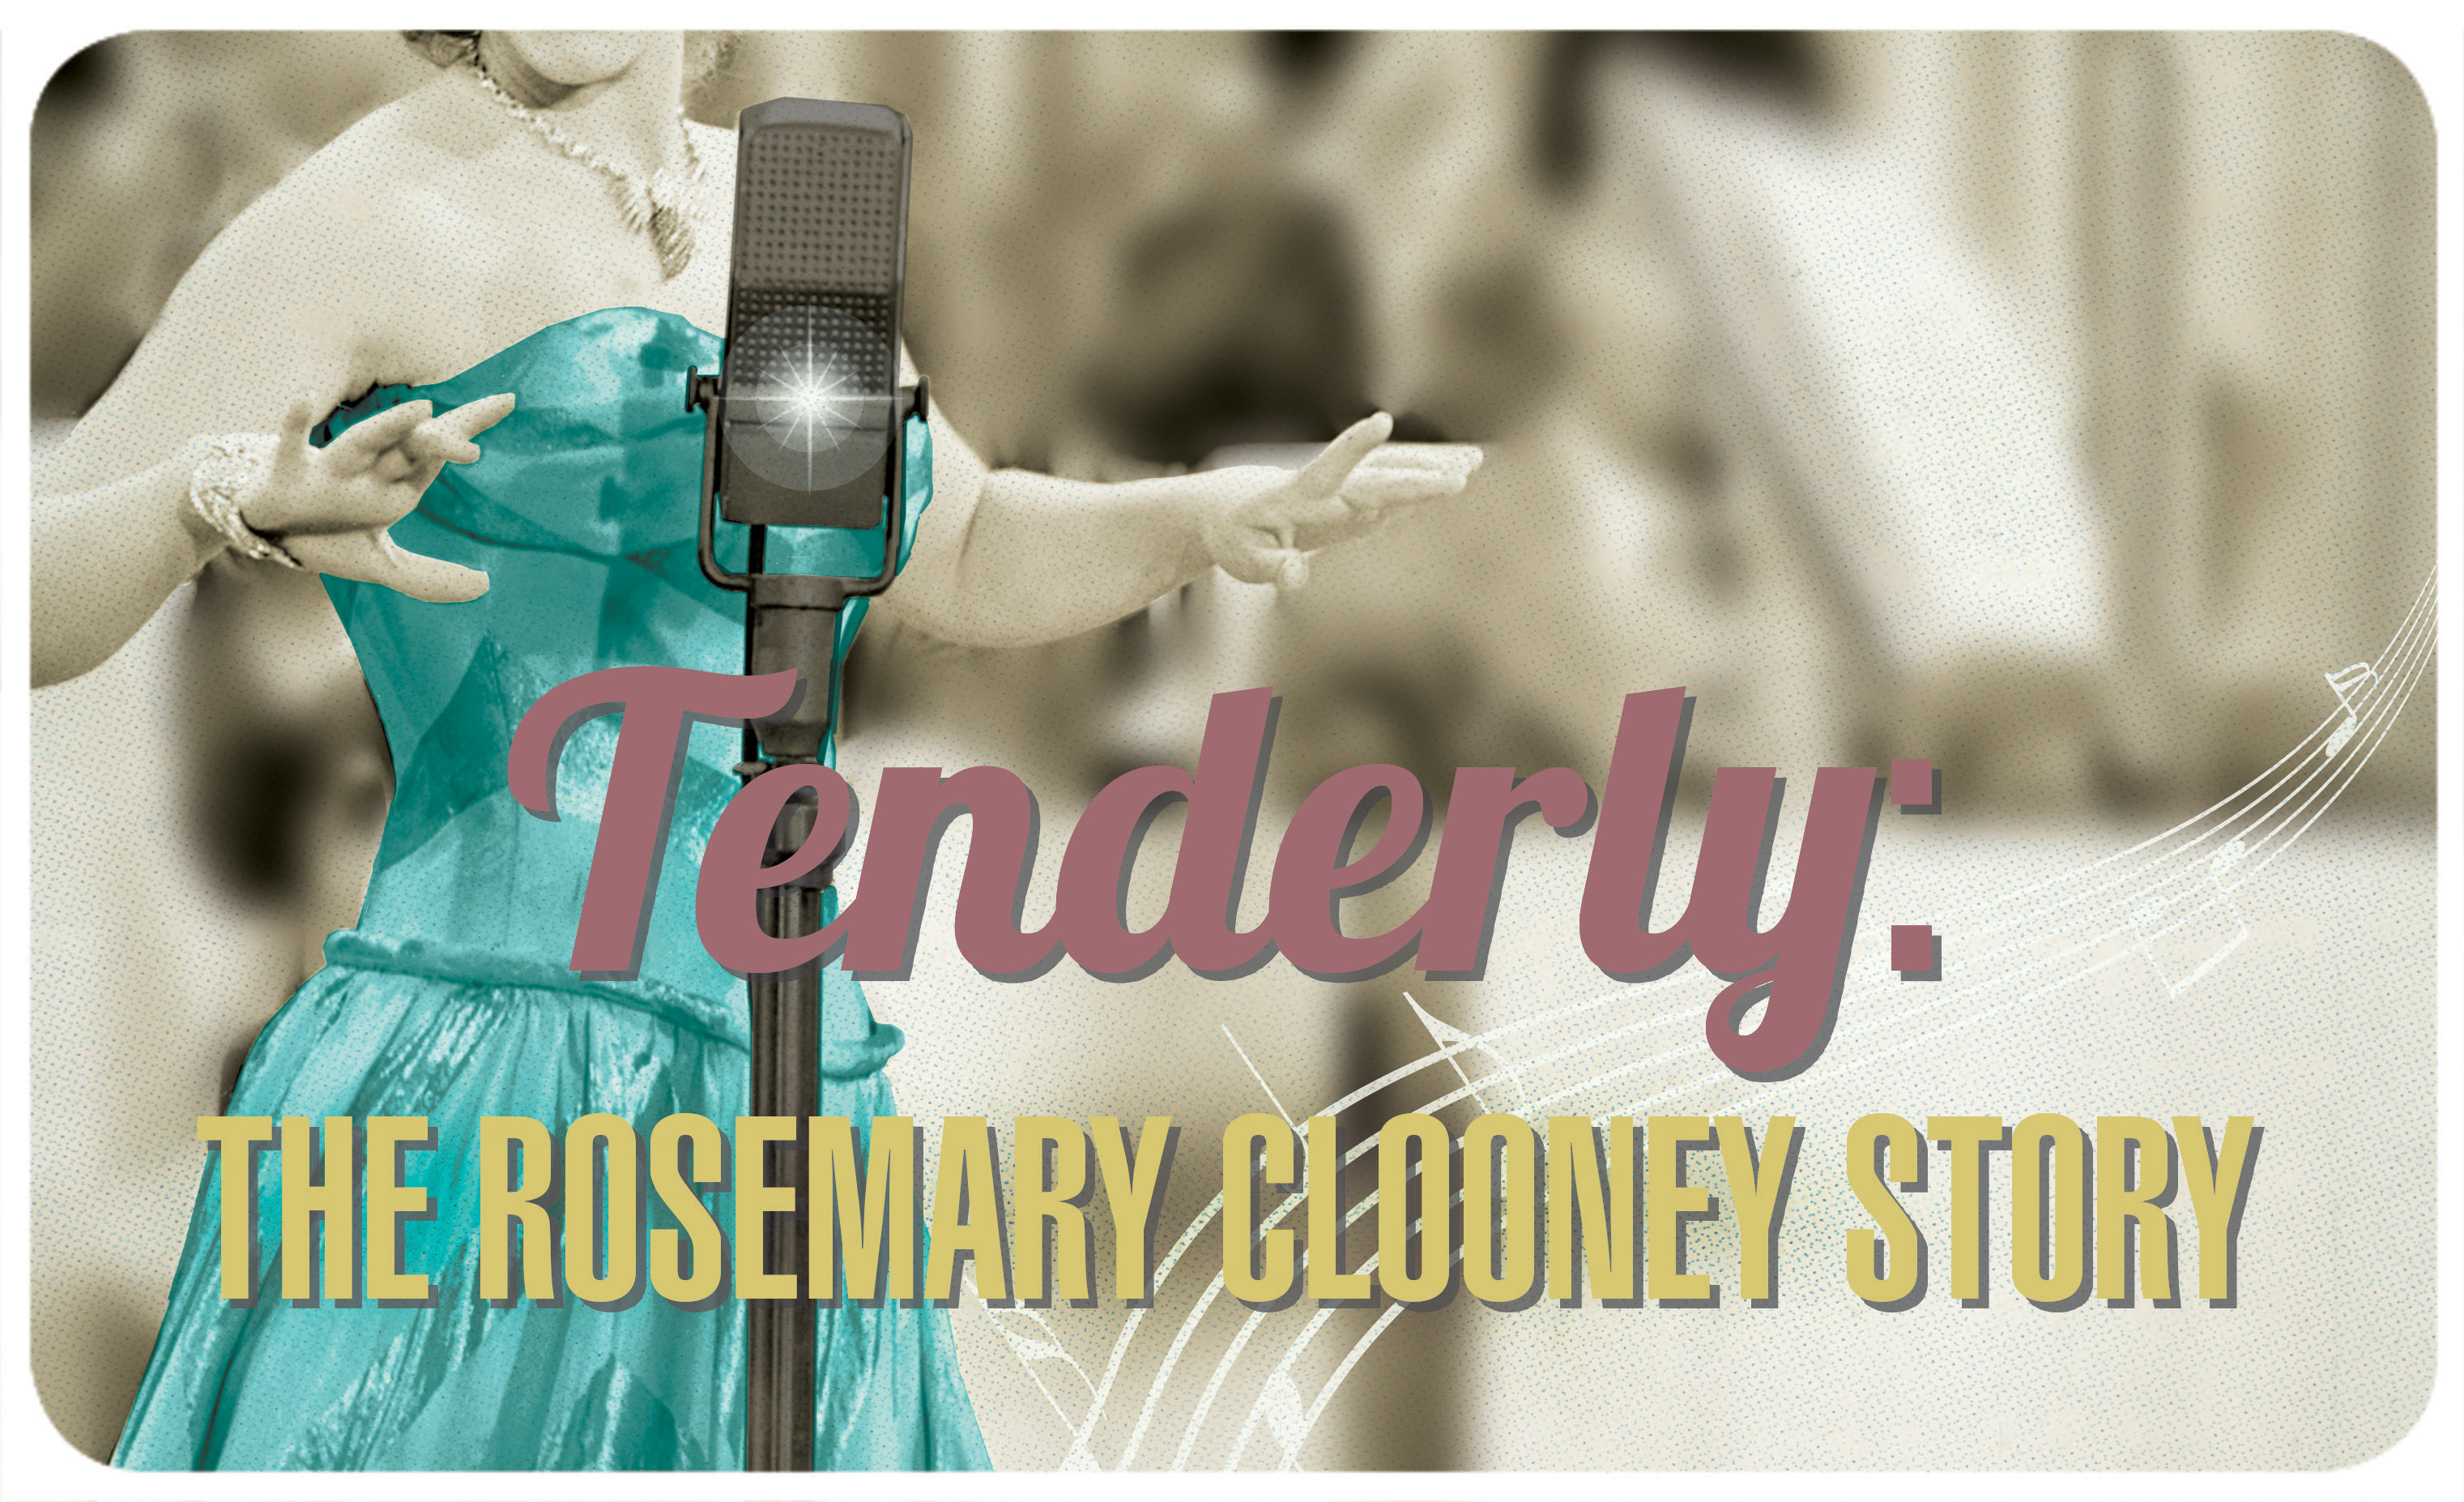 Tenderly: The Rosemary Clooney Story